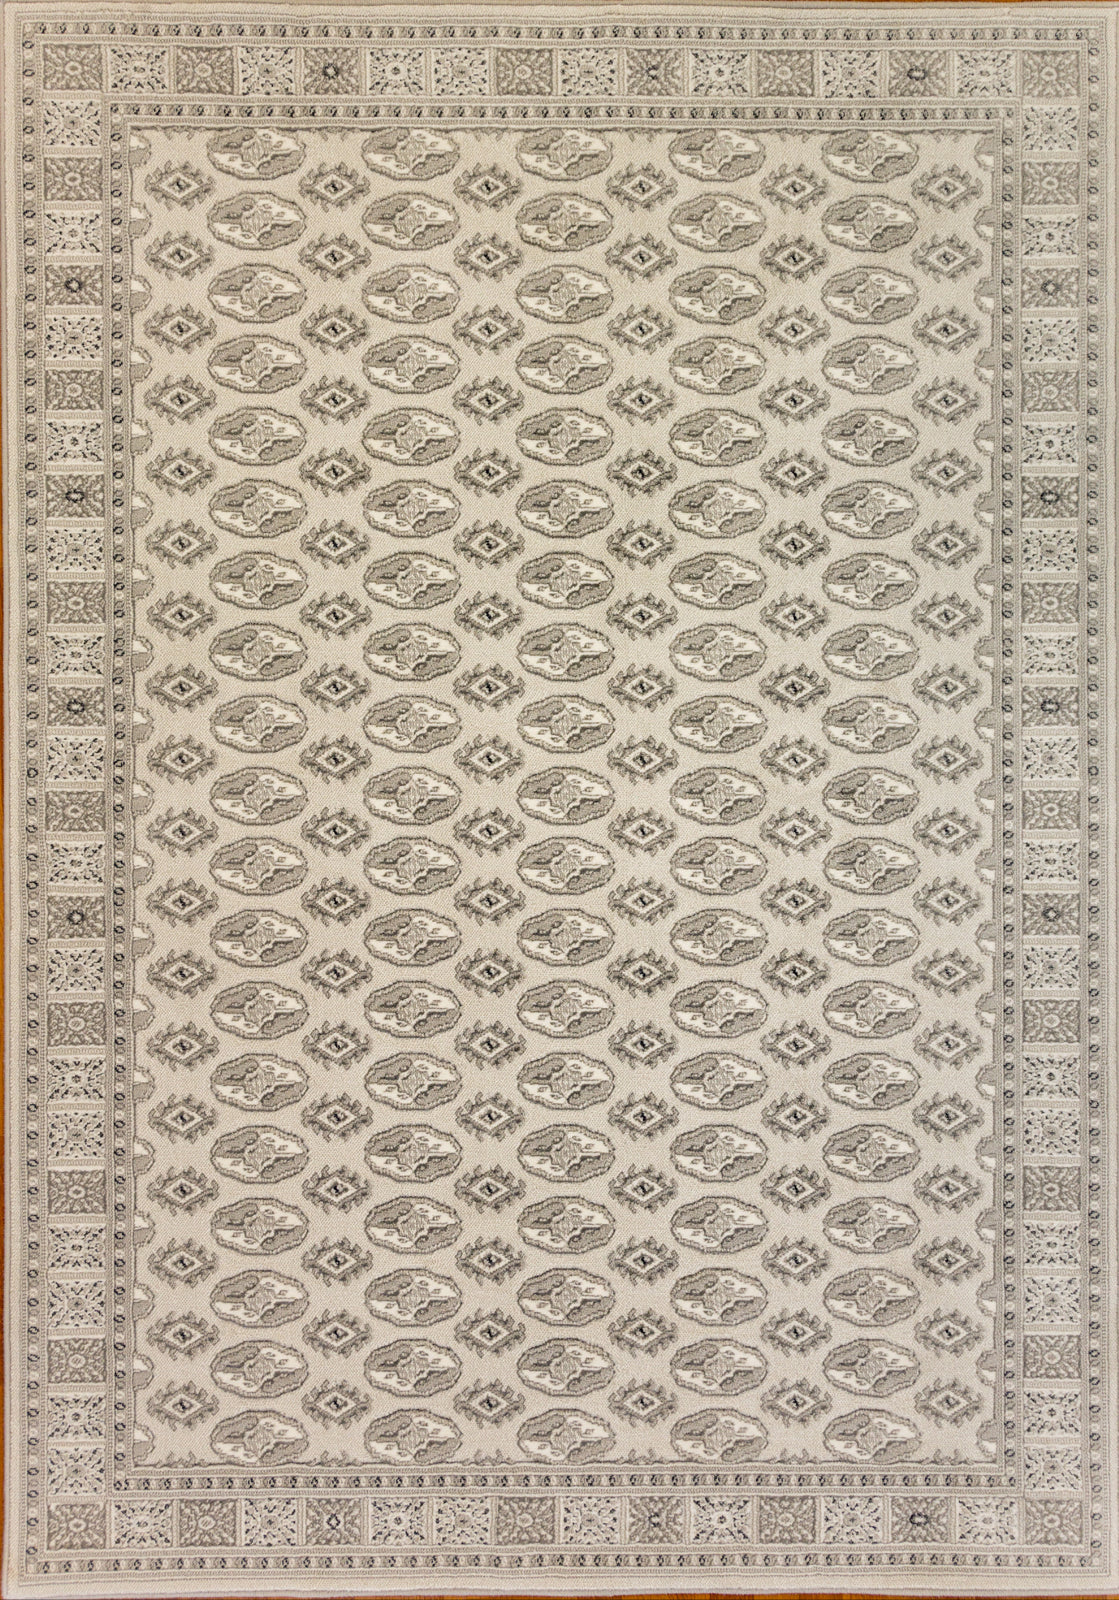 Dynamic Rugs Imperial 12146 Beige Area Rug main image